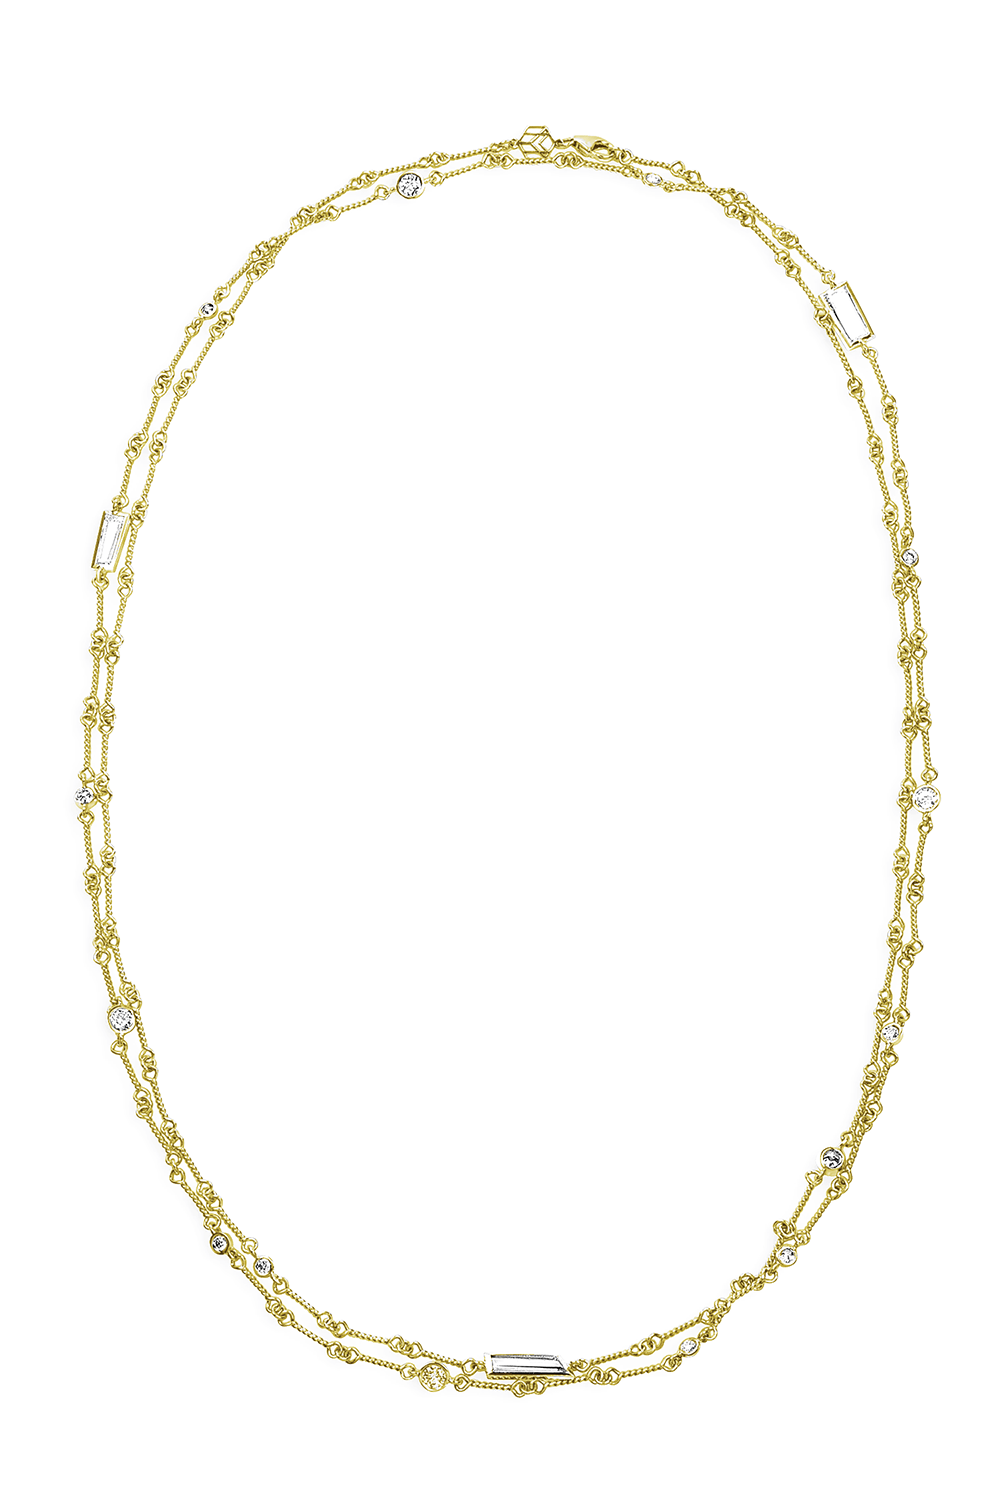 MEREDITH YOUNG-Chasm Diamonds By The Yard Necklace-YELLOW GOLD